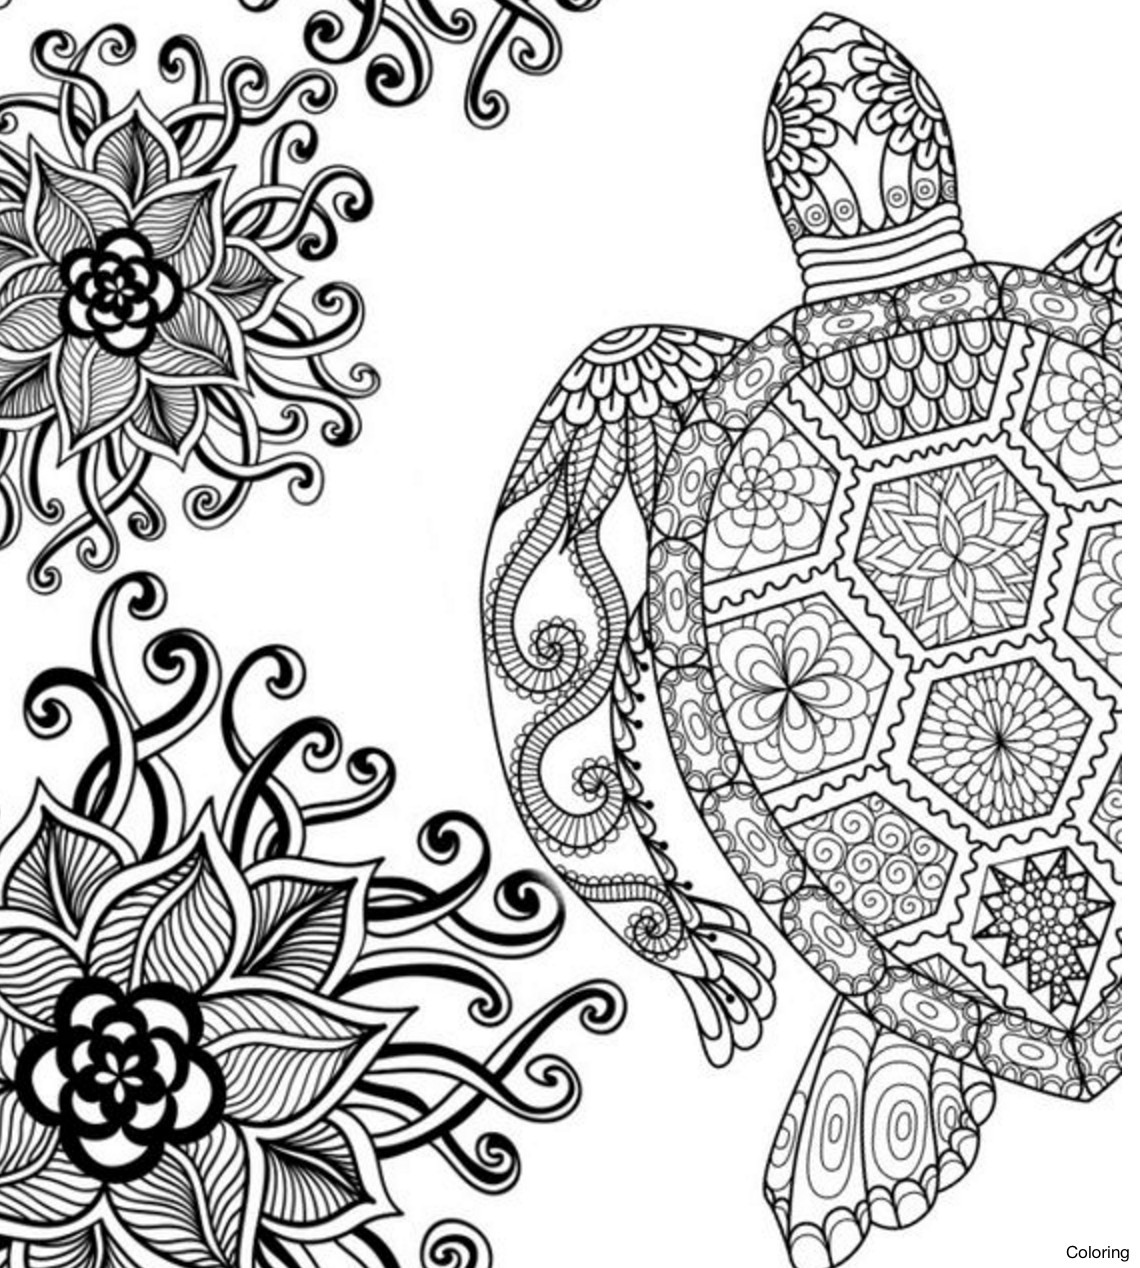 Turtle Coloring Pages For Adults
 Adult Turtle Coloring Pages Inspire 22 Best Ocean World